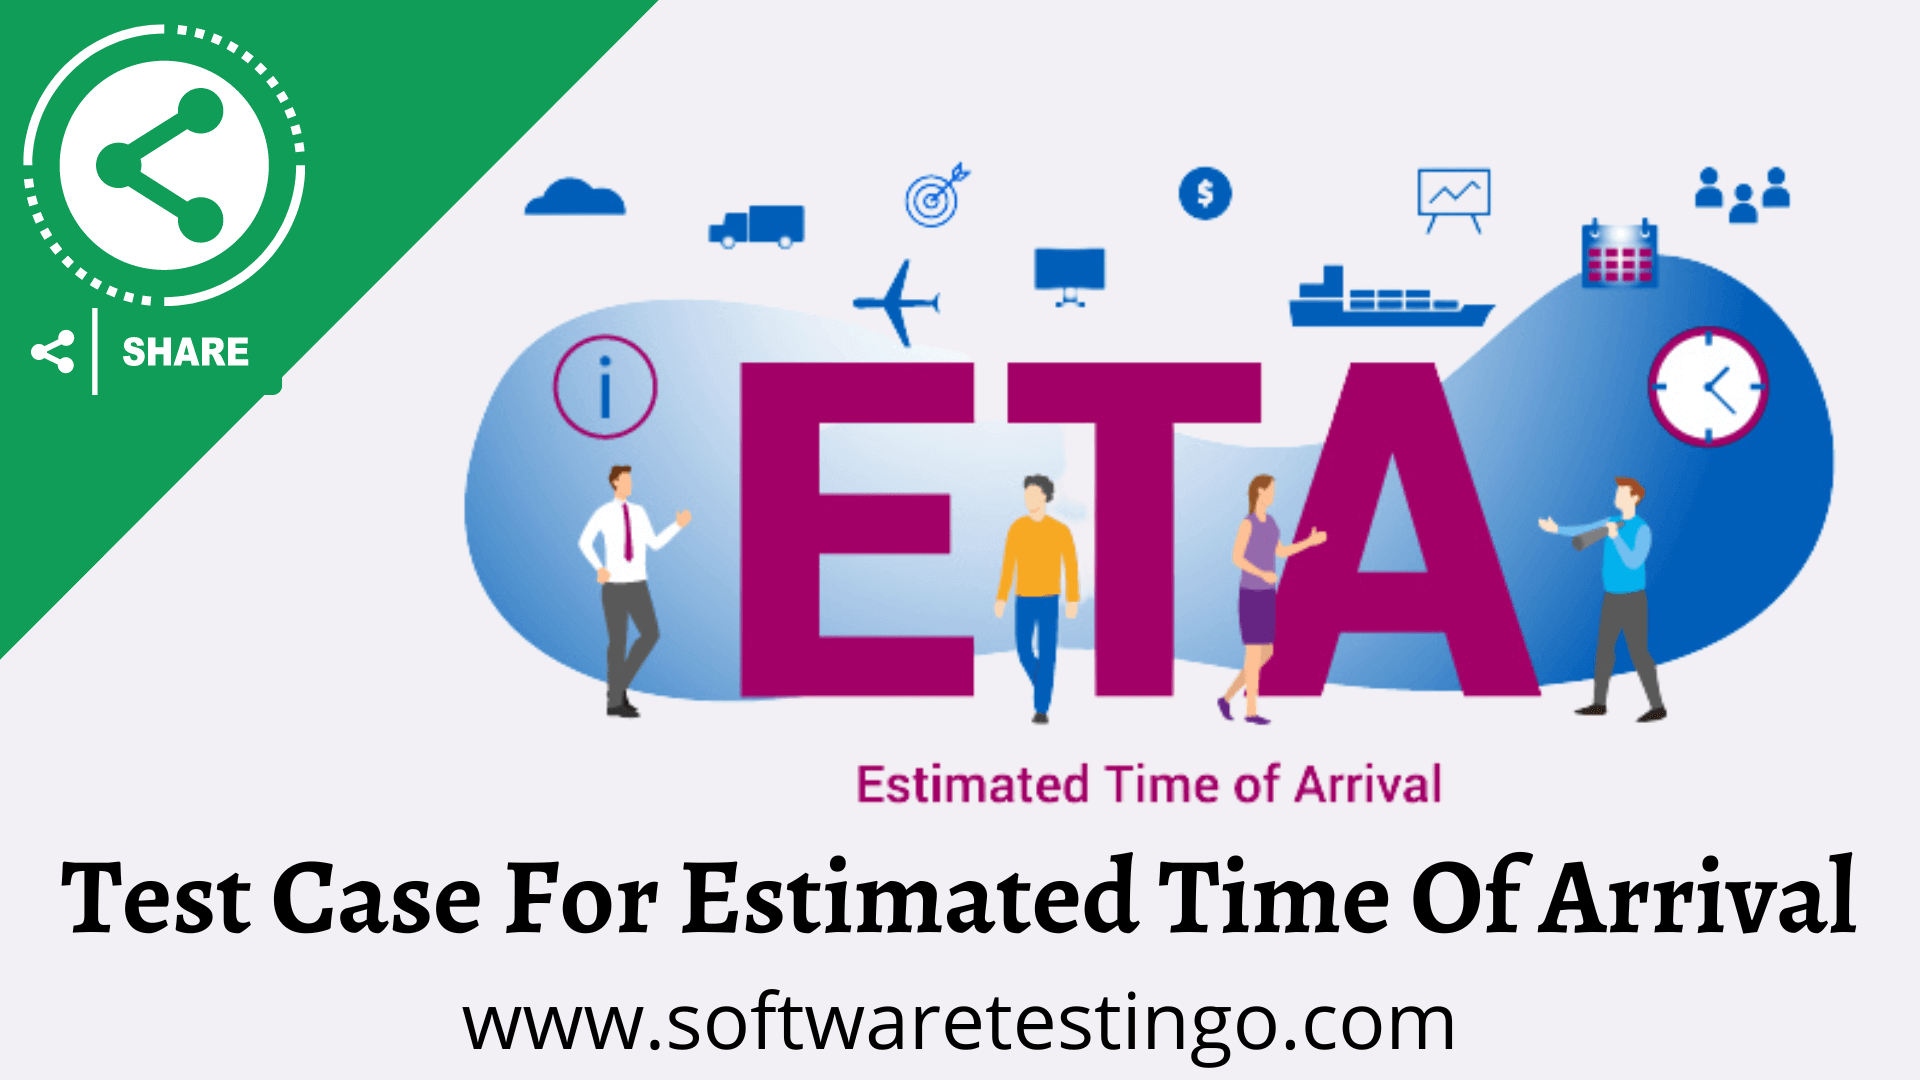 Test Case For Estimated Time Of Arrival